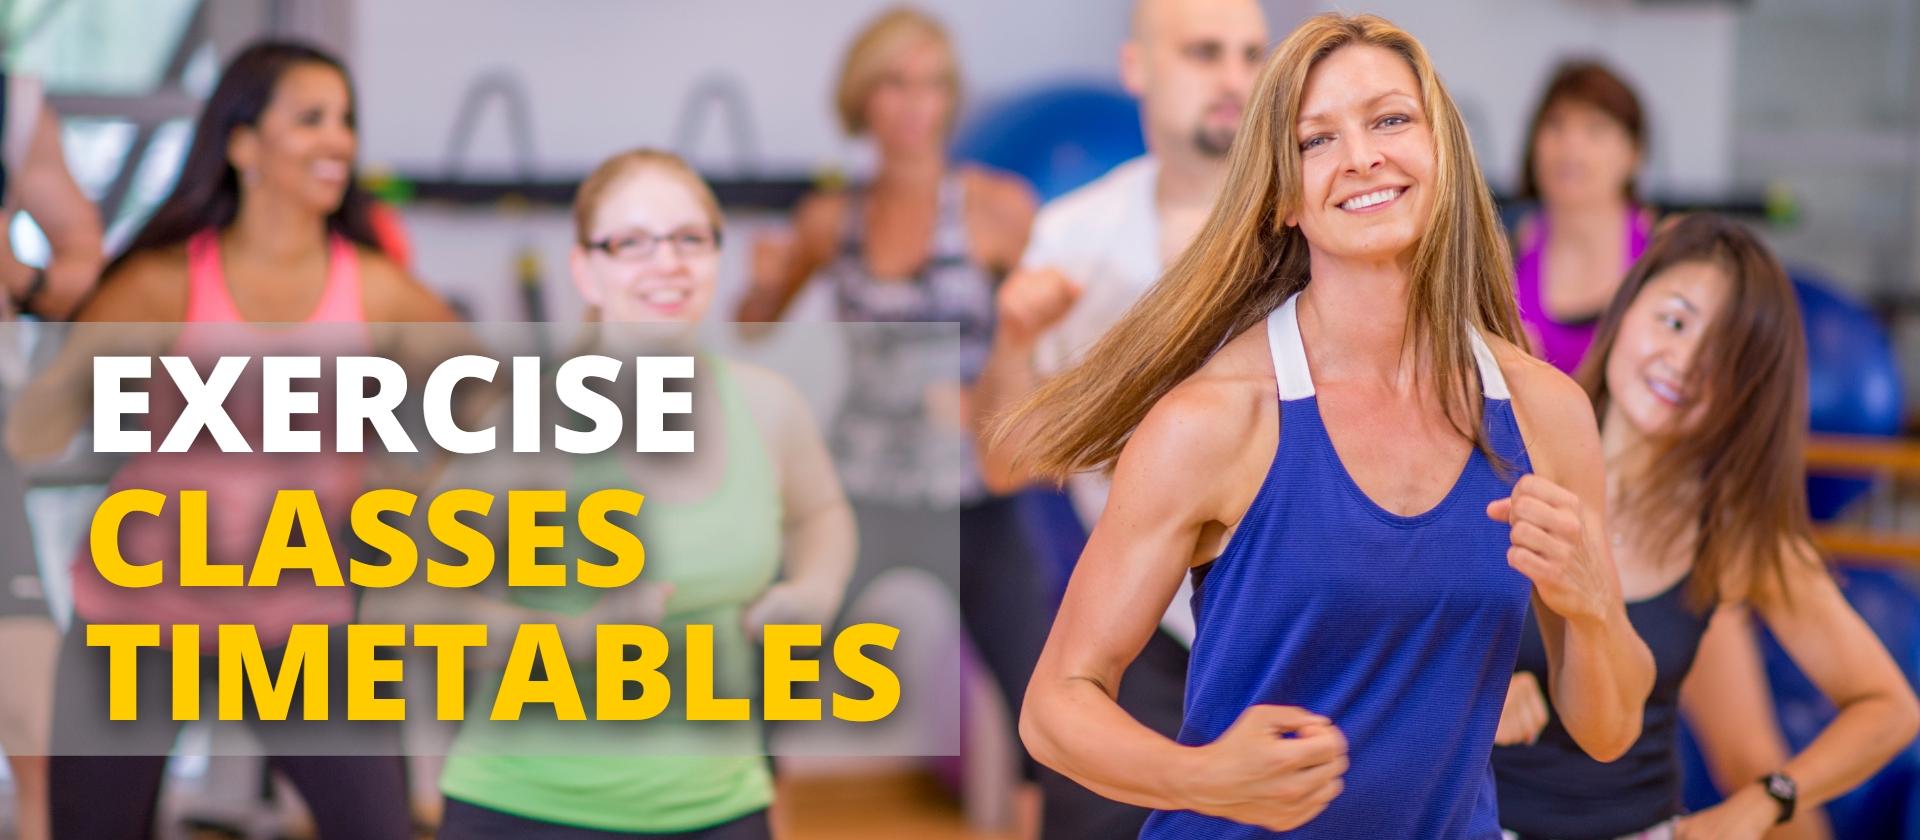 North Warwickshire exercise and fitness classes timetables